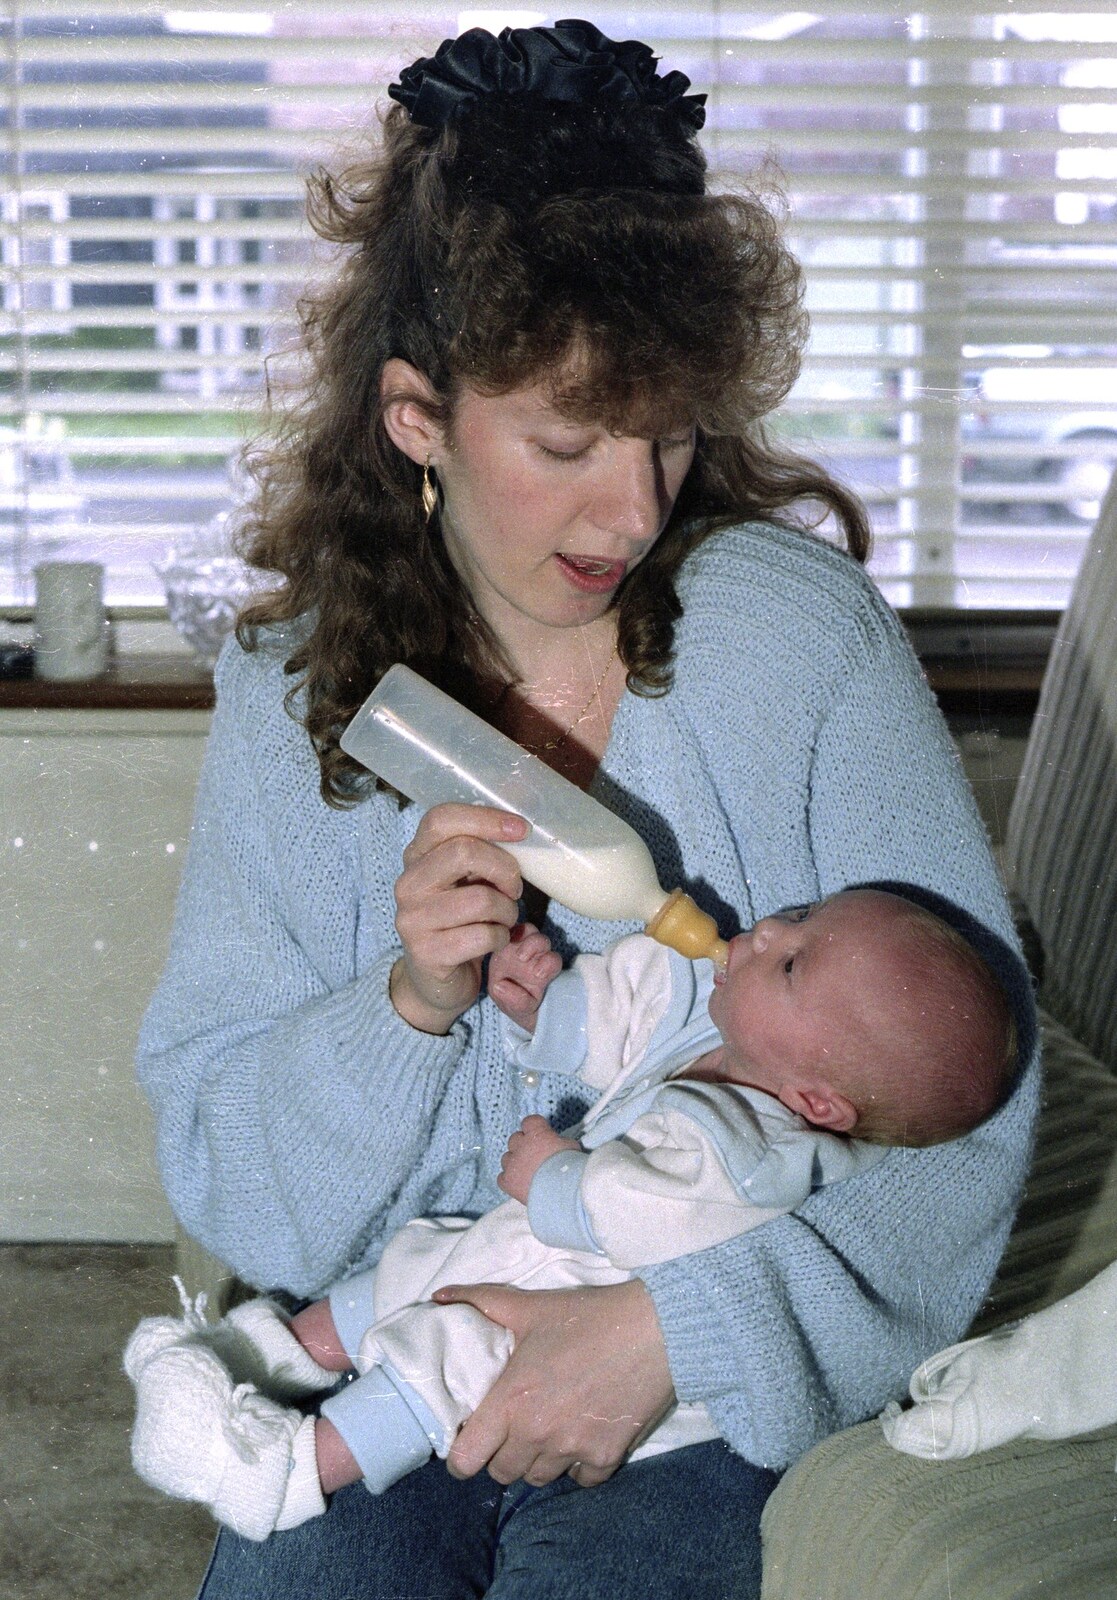 A Trip to Center Parcs, Eemhof, Netherlands - 24th March 1992: In Diss, Monique feeds her new sprog